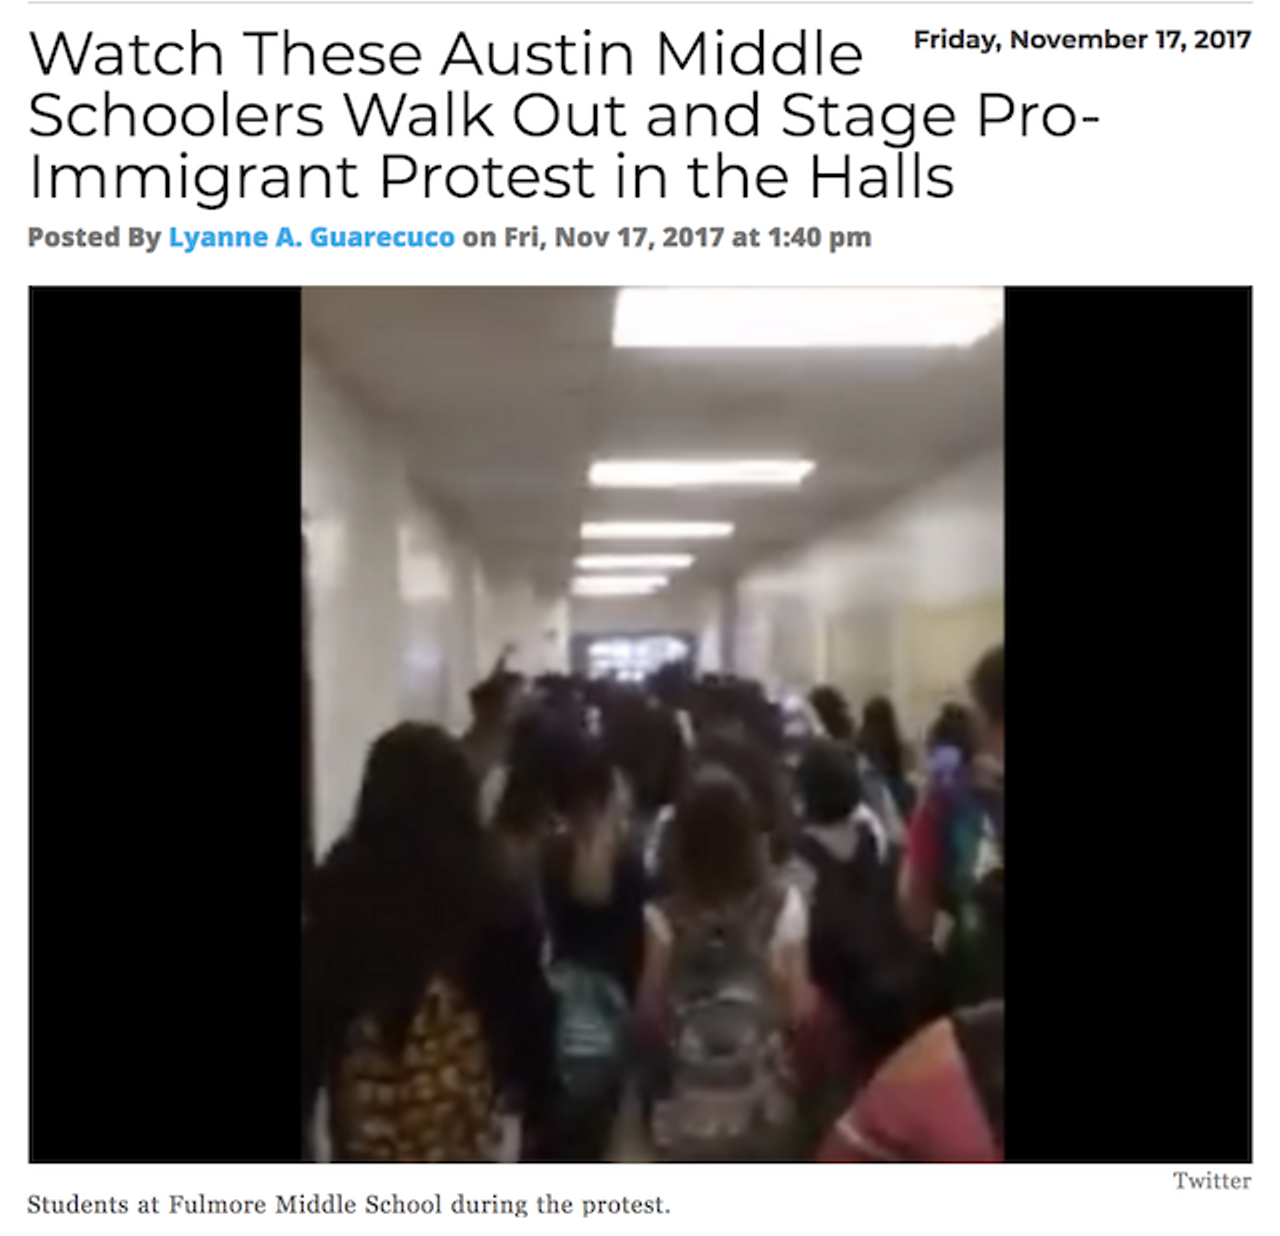 After a teacher allegedly made a racist comment to student, many kids flocked the halls chanting, "Say it loud, say it clear, immigrants are welcome here!" :’) Read more.